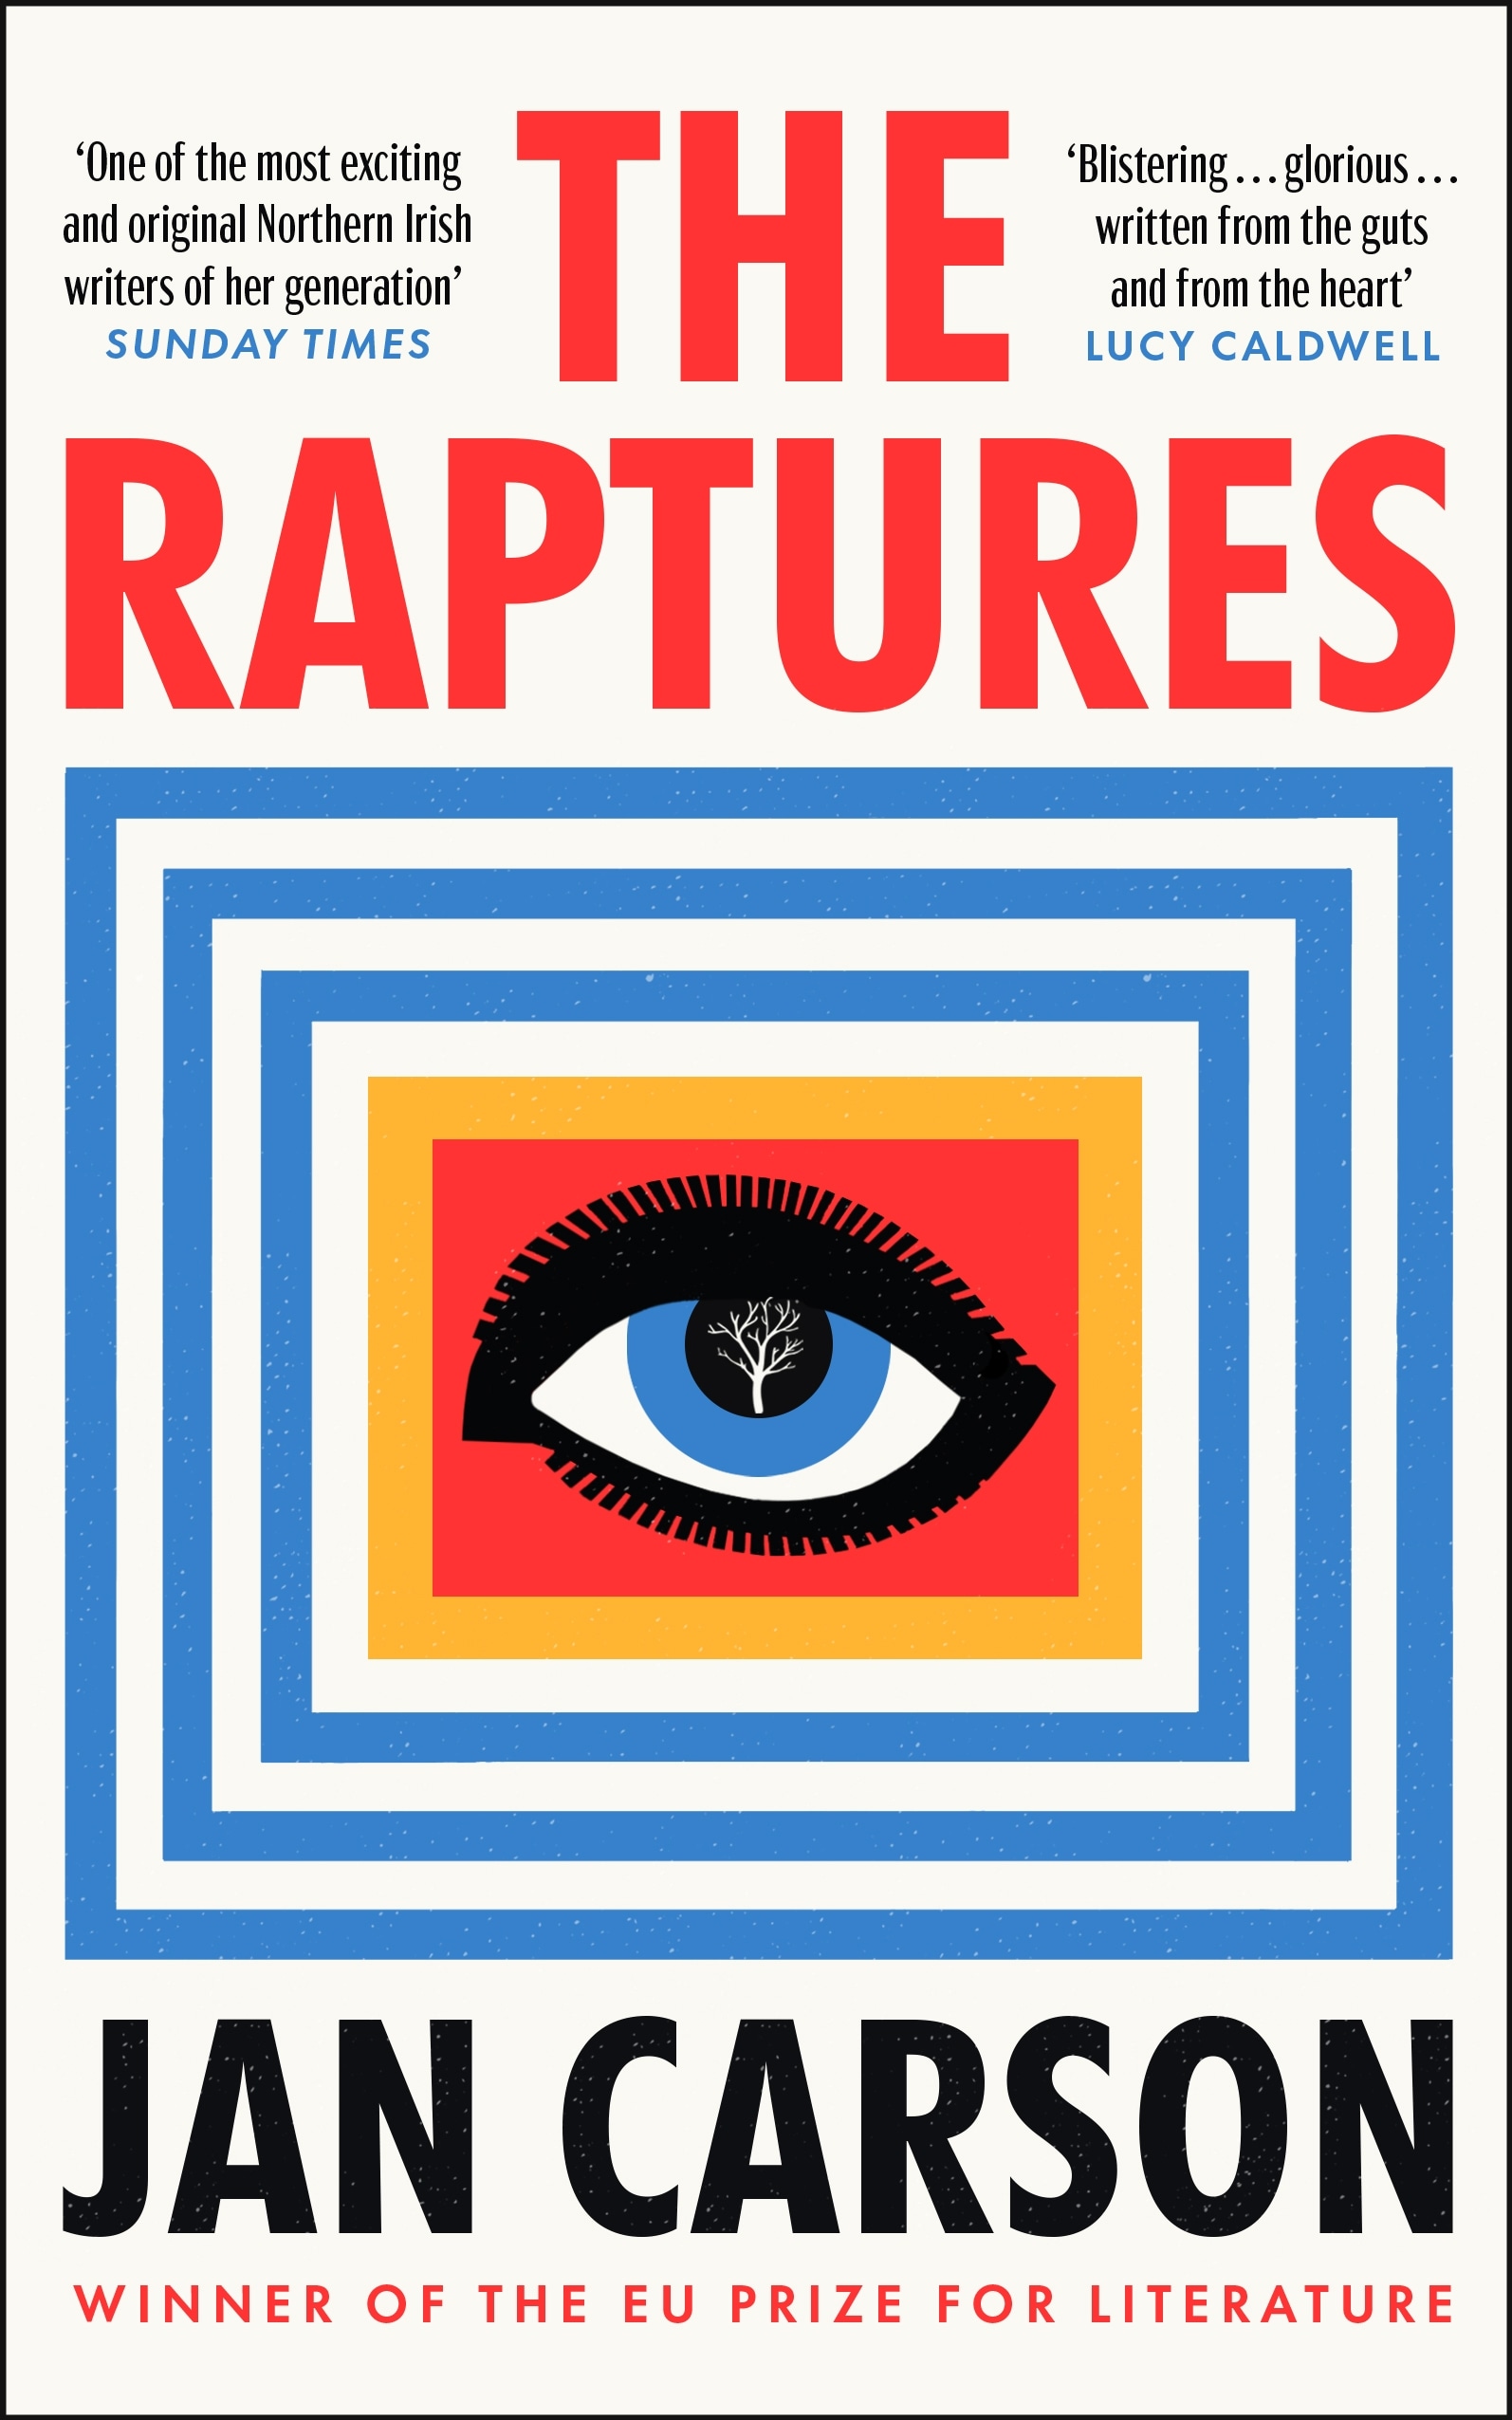 Book “The Raptures” by Jan Carson — January 6, 2022